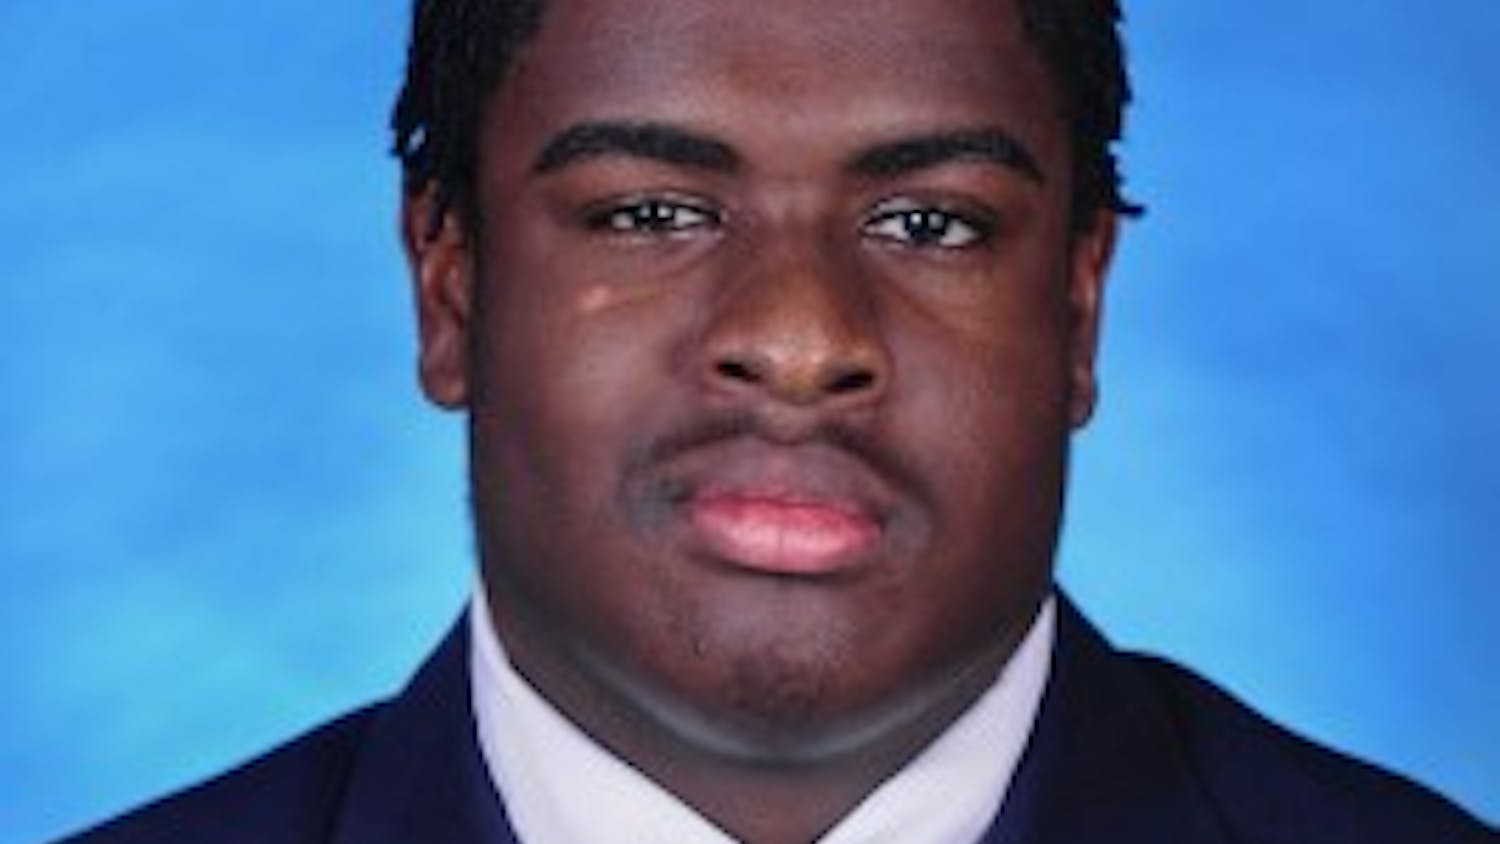 R.J. Prince is a redshirt sophomore offensive tackle for North Carolina.